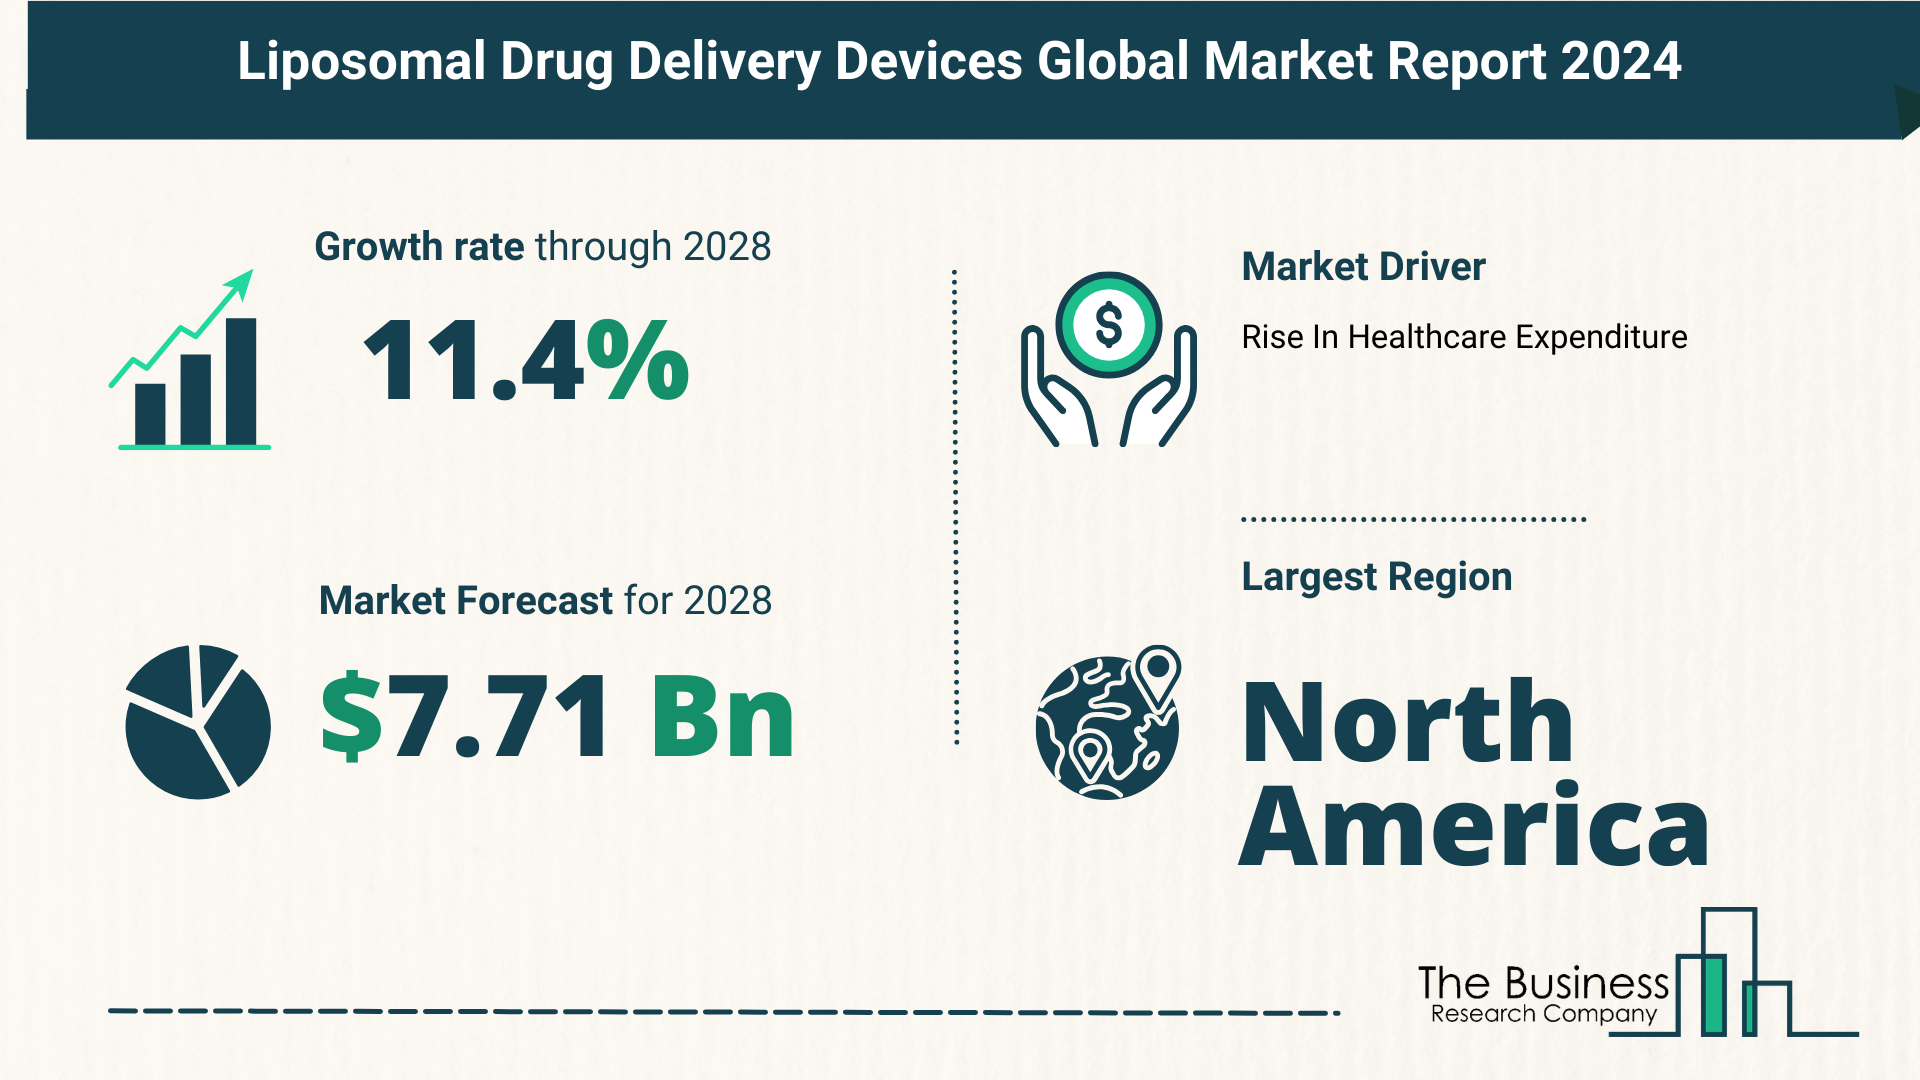 Key Trends And Drivers In The Liposomal Drug Delivery Devices Market 2024